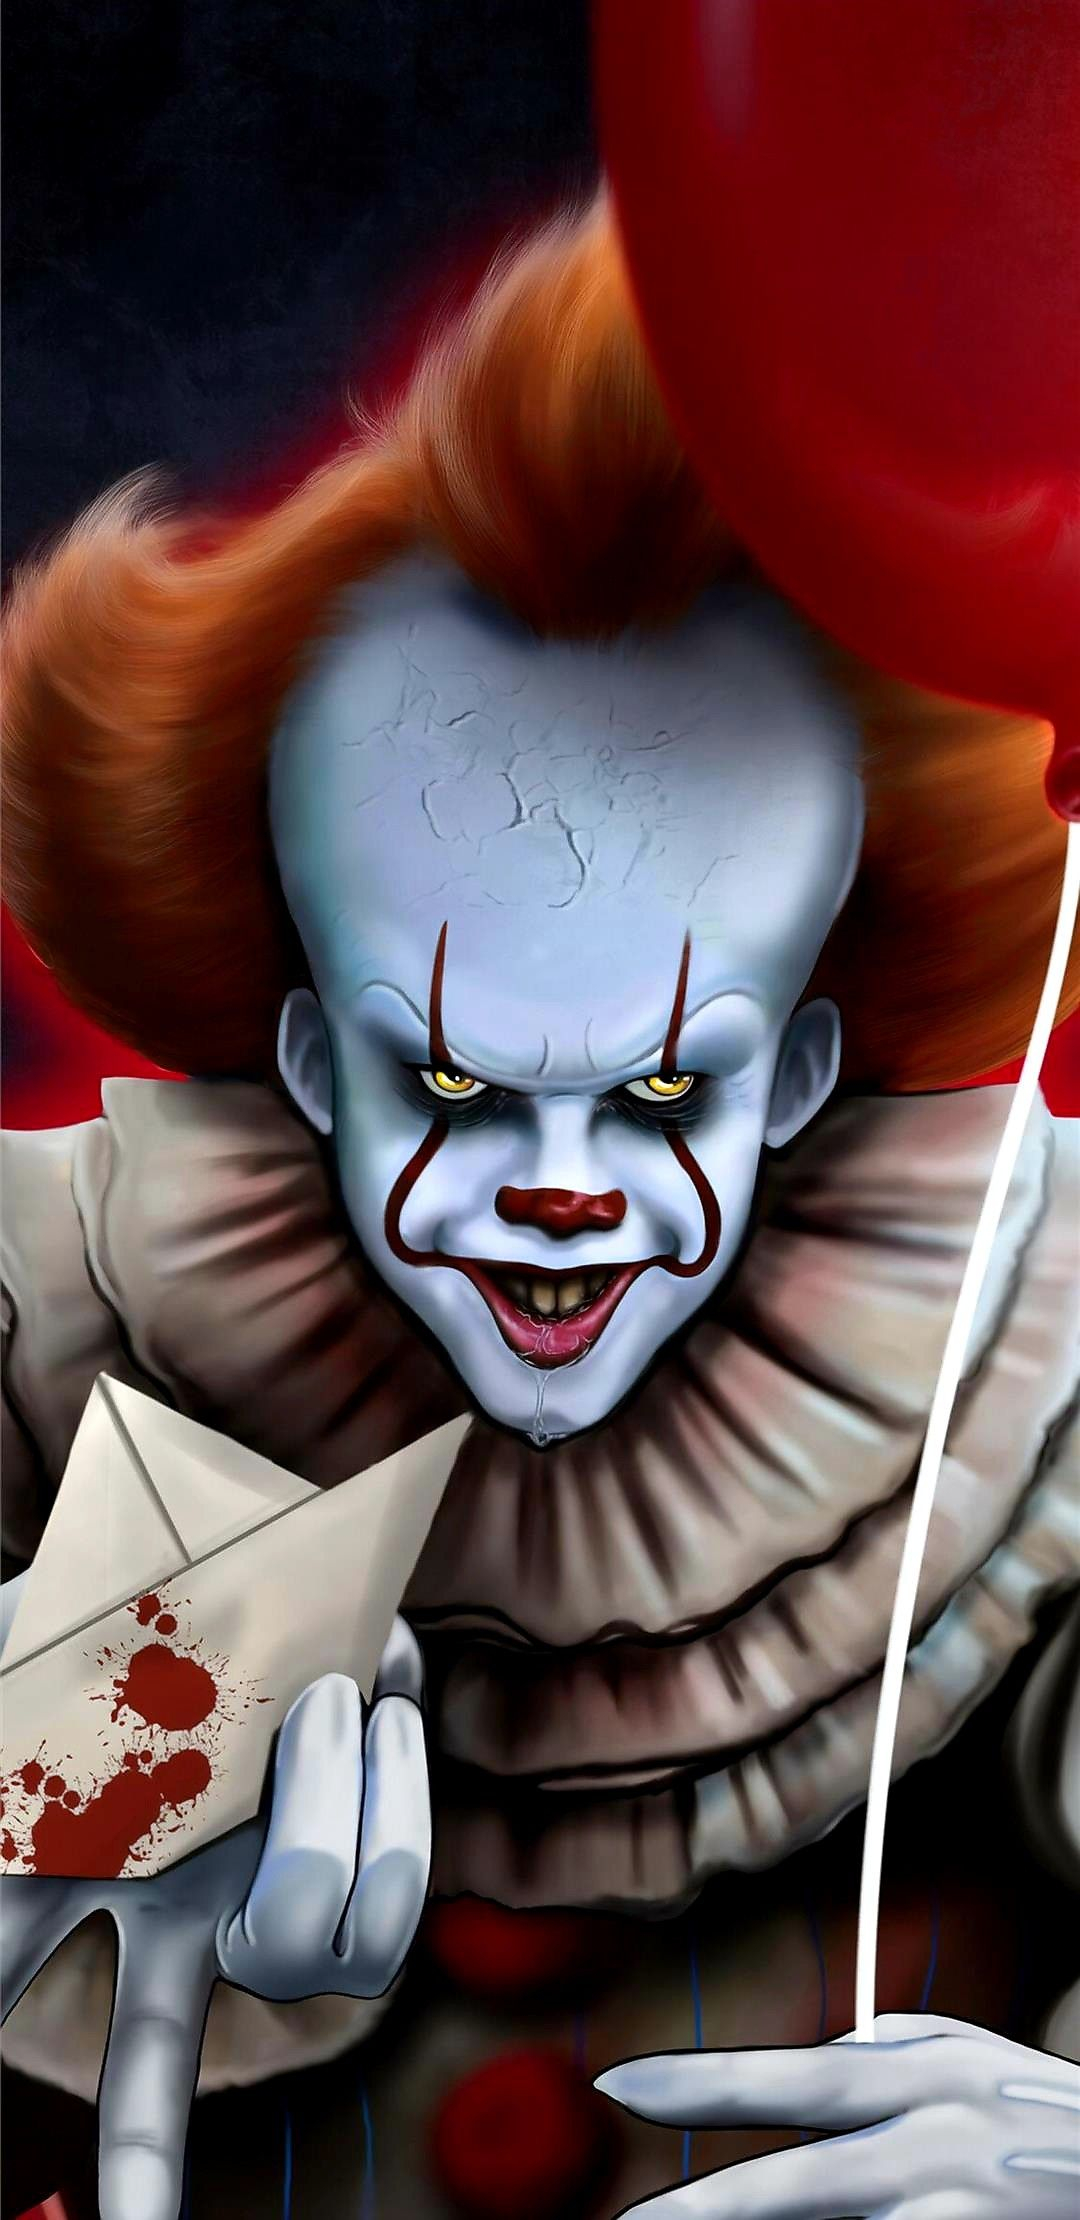 1080x2220 Pin by Brian on Pennywise/IT | Scary wallpaper, Horror artwork, Halloween wallpaper iphone